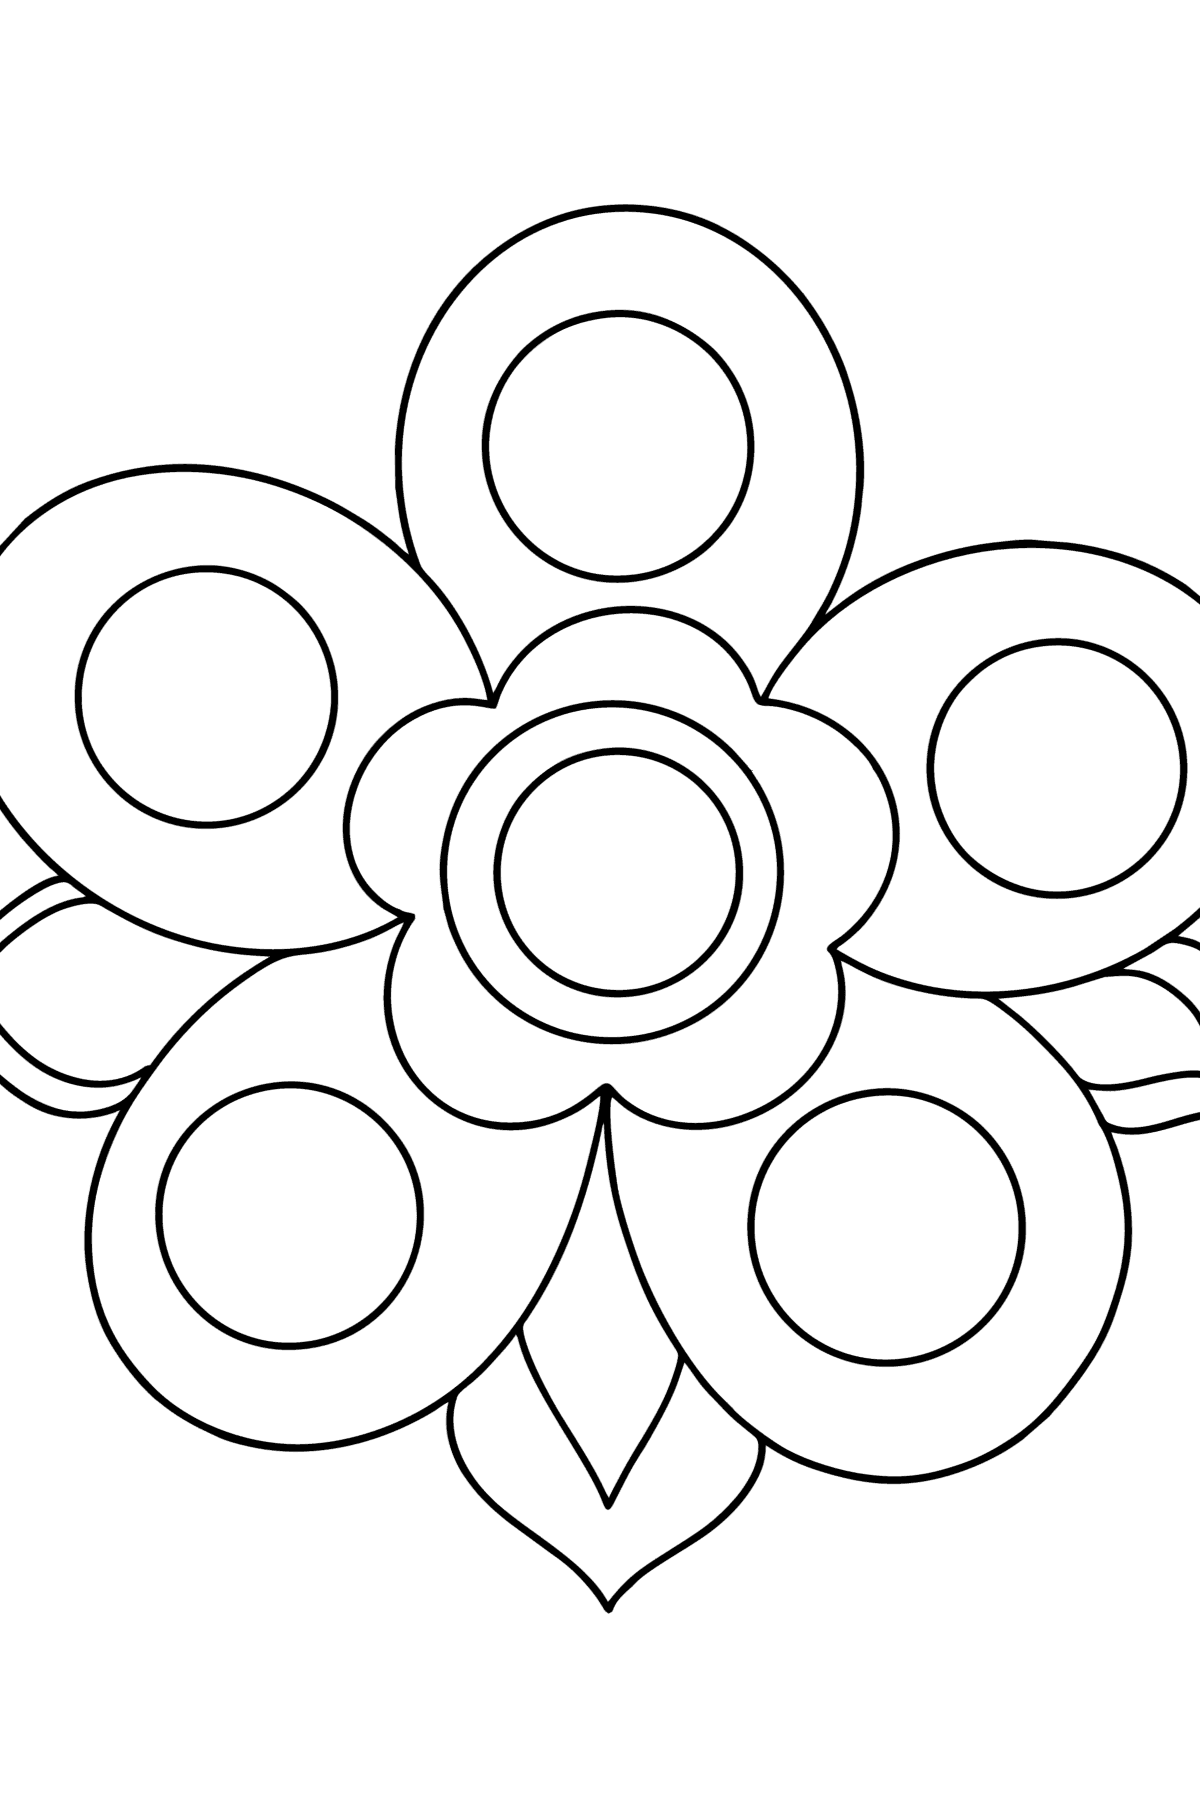 Simple Relaxing Coloring page - Coloring Pages for Kids